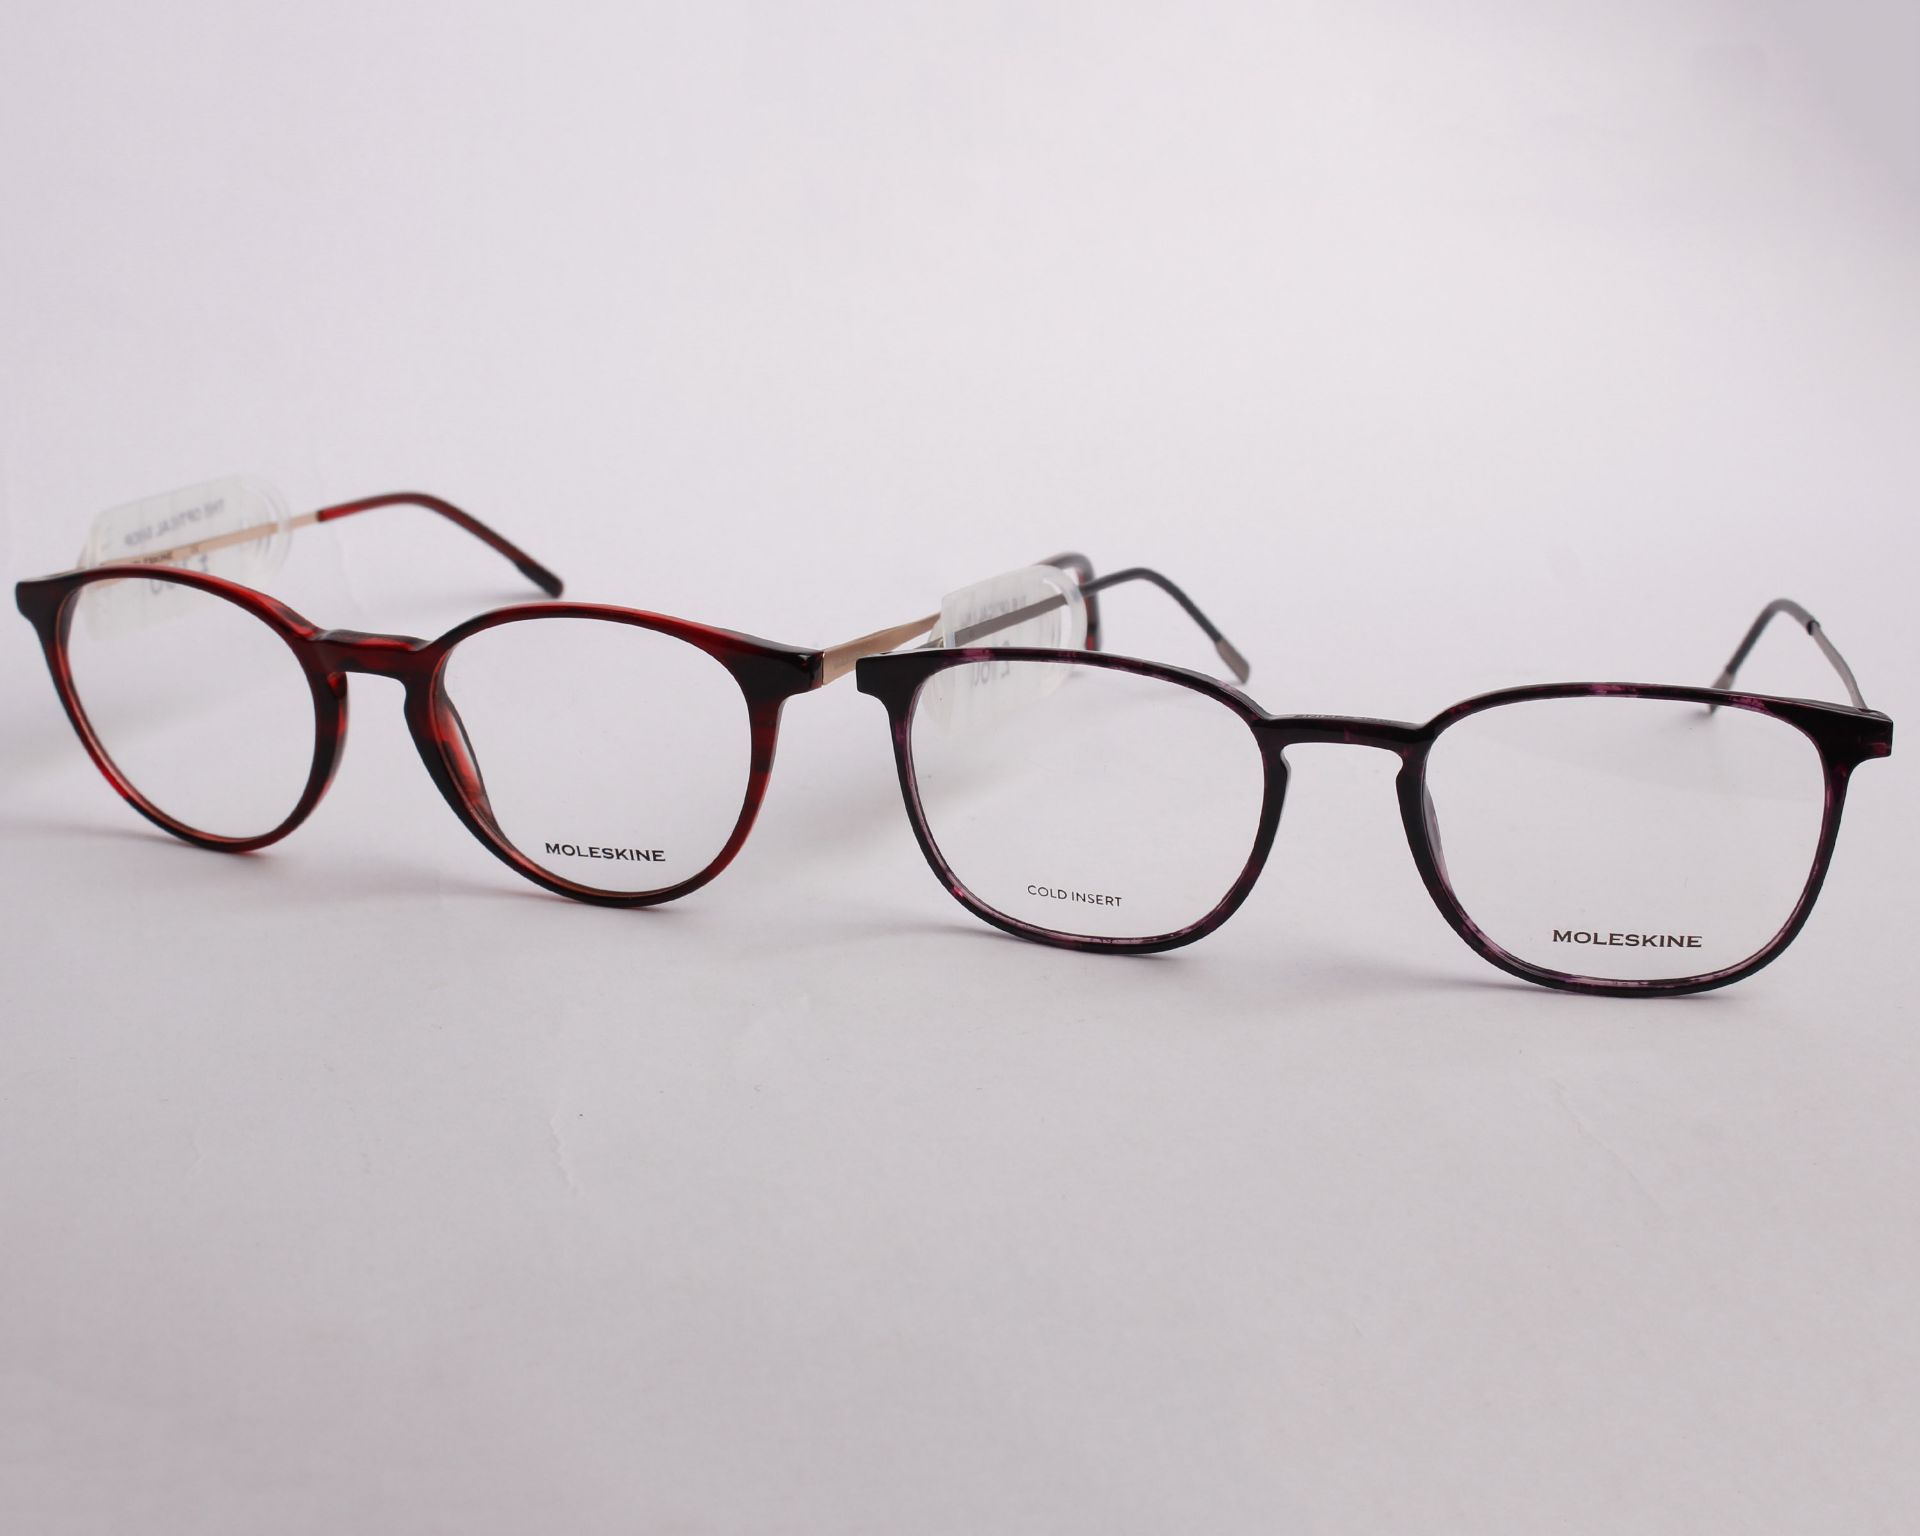 Two pairs of as new Moleskine glasses frames with clear glass (RRP £160 each). - Image 3 of 3